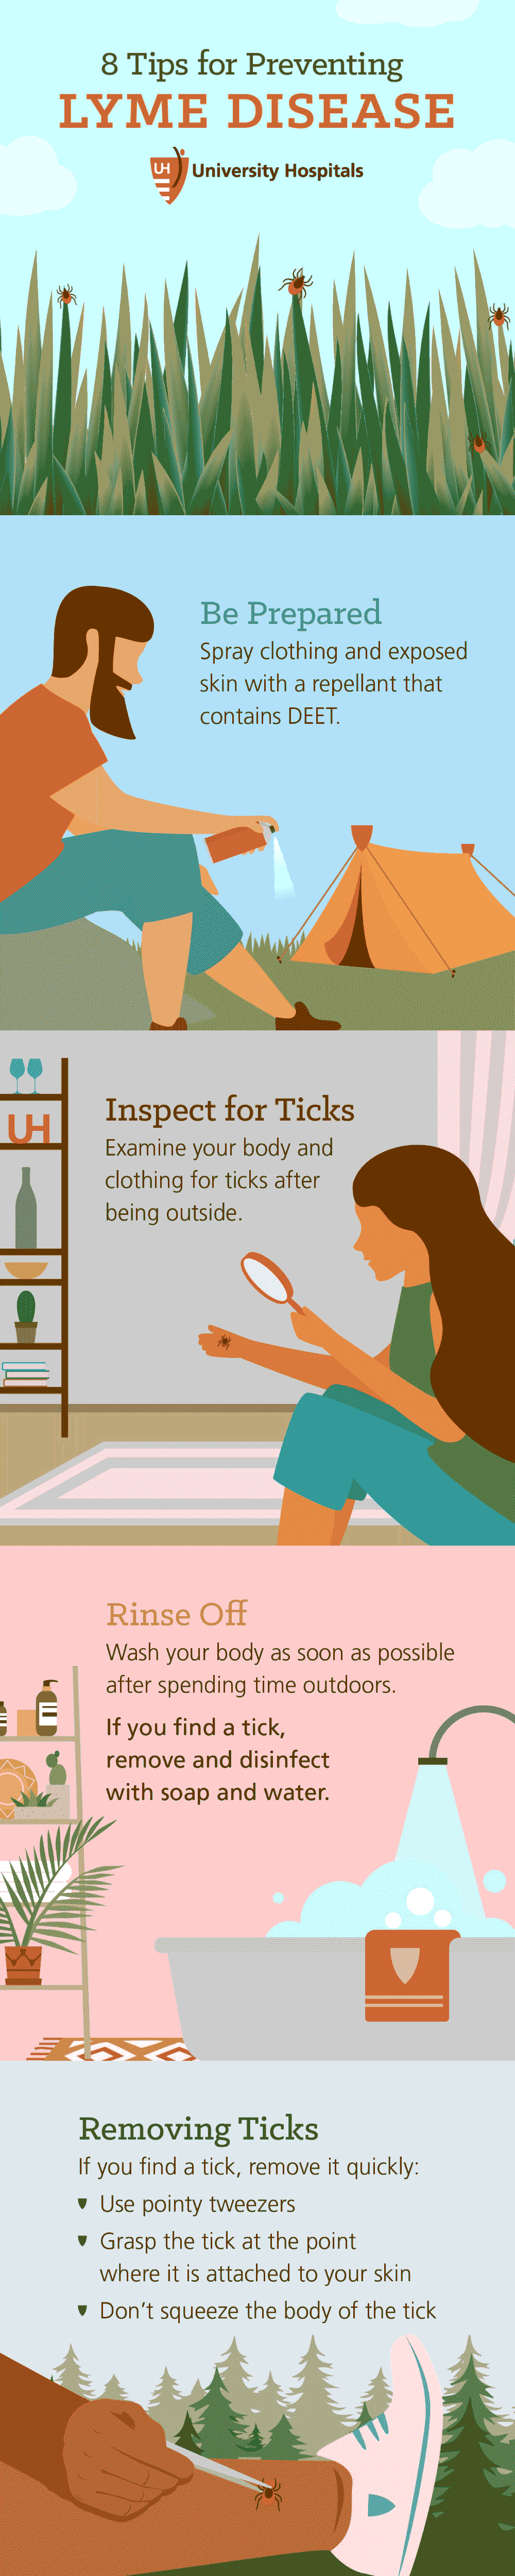 Infographic: 8 Tips to Prevent Lyme Disease: Be prepared, inspect for ticks, rinse off, removing ticks